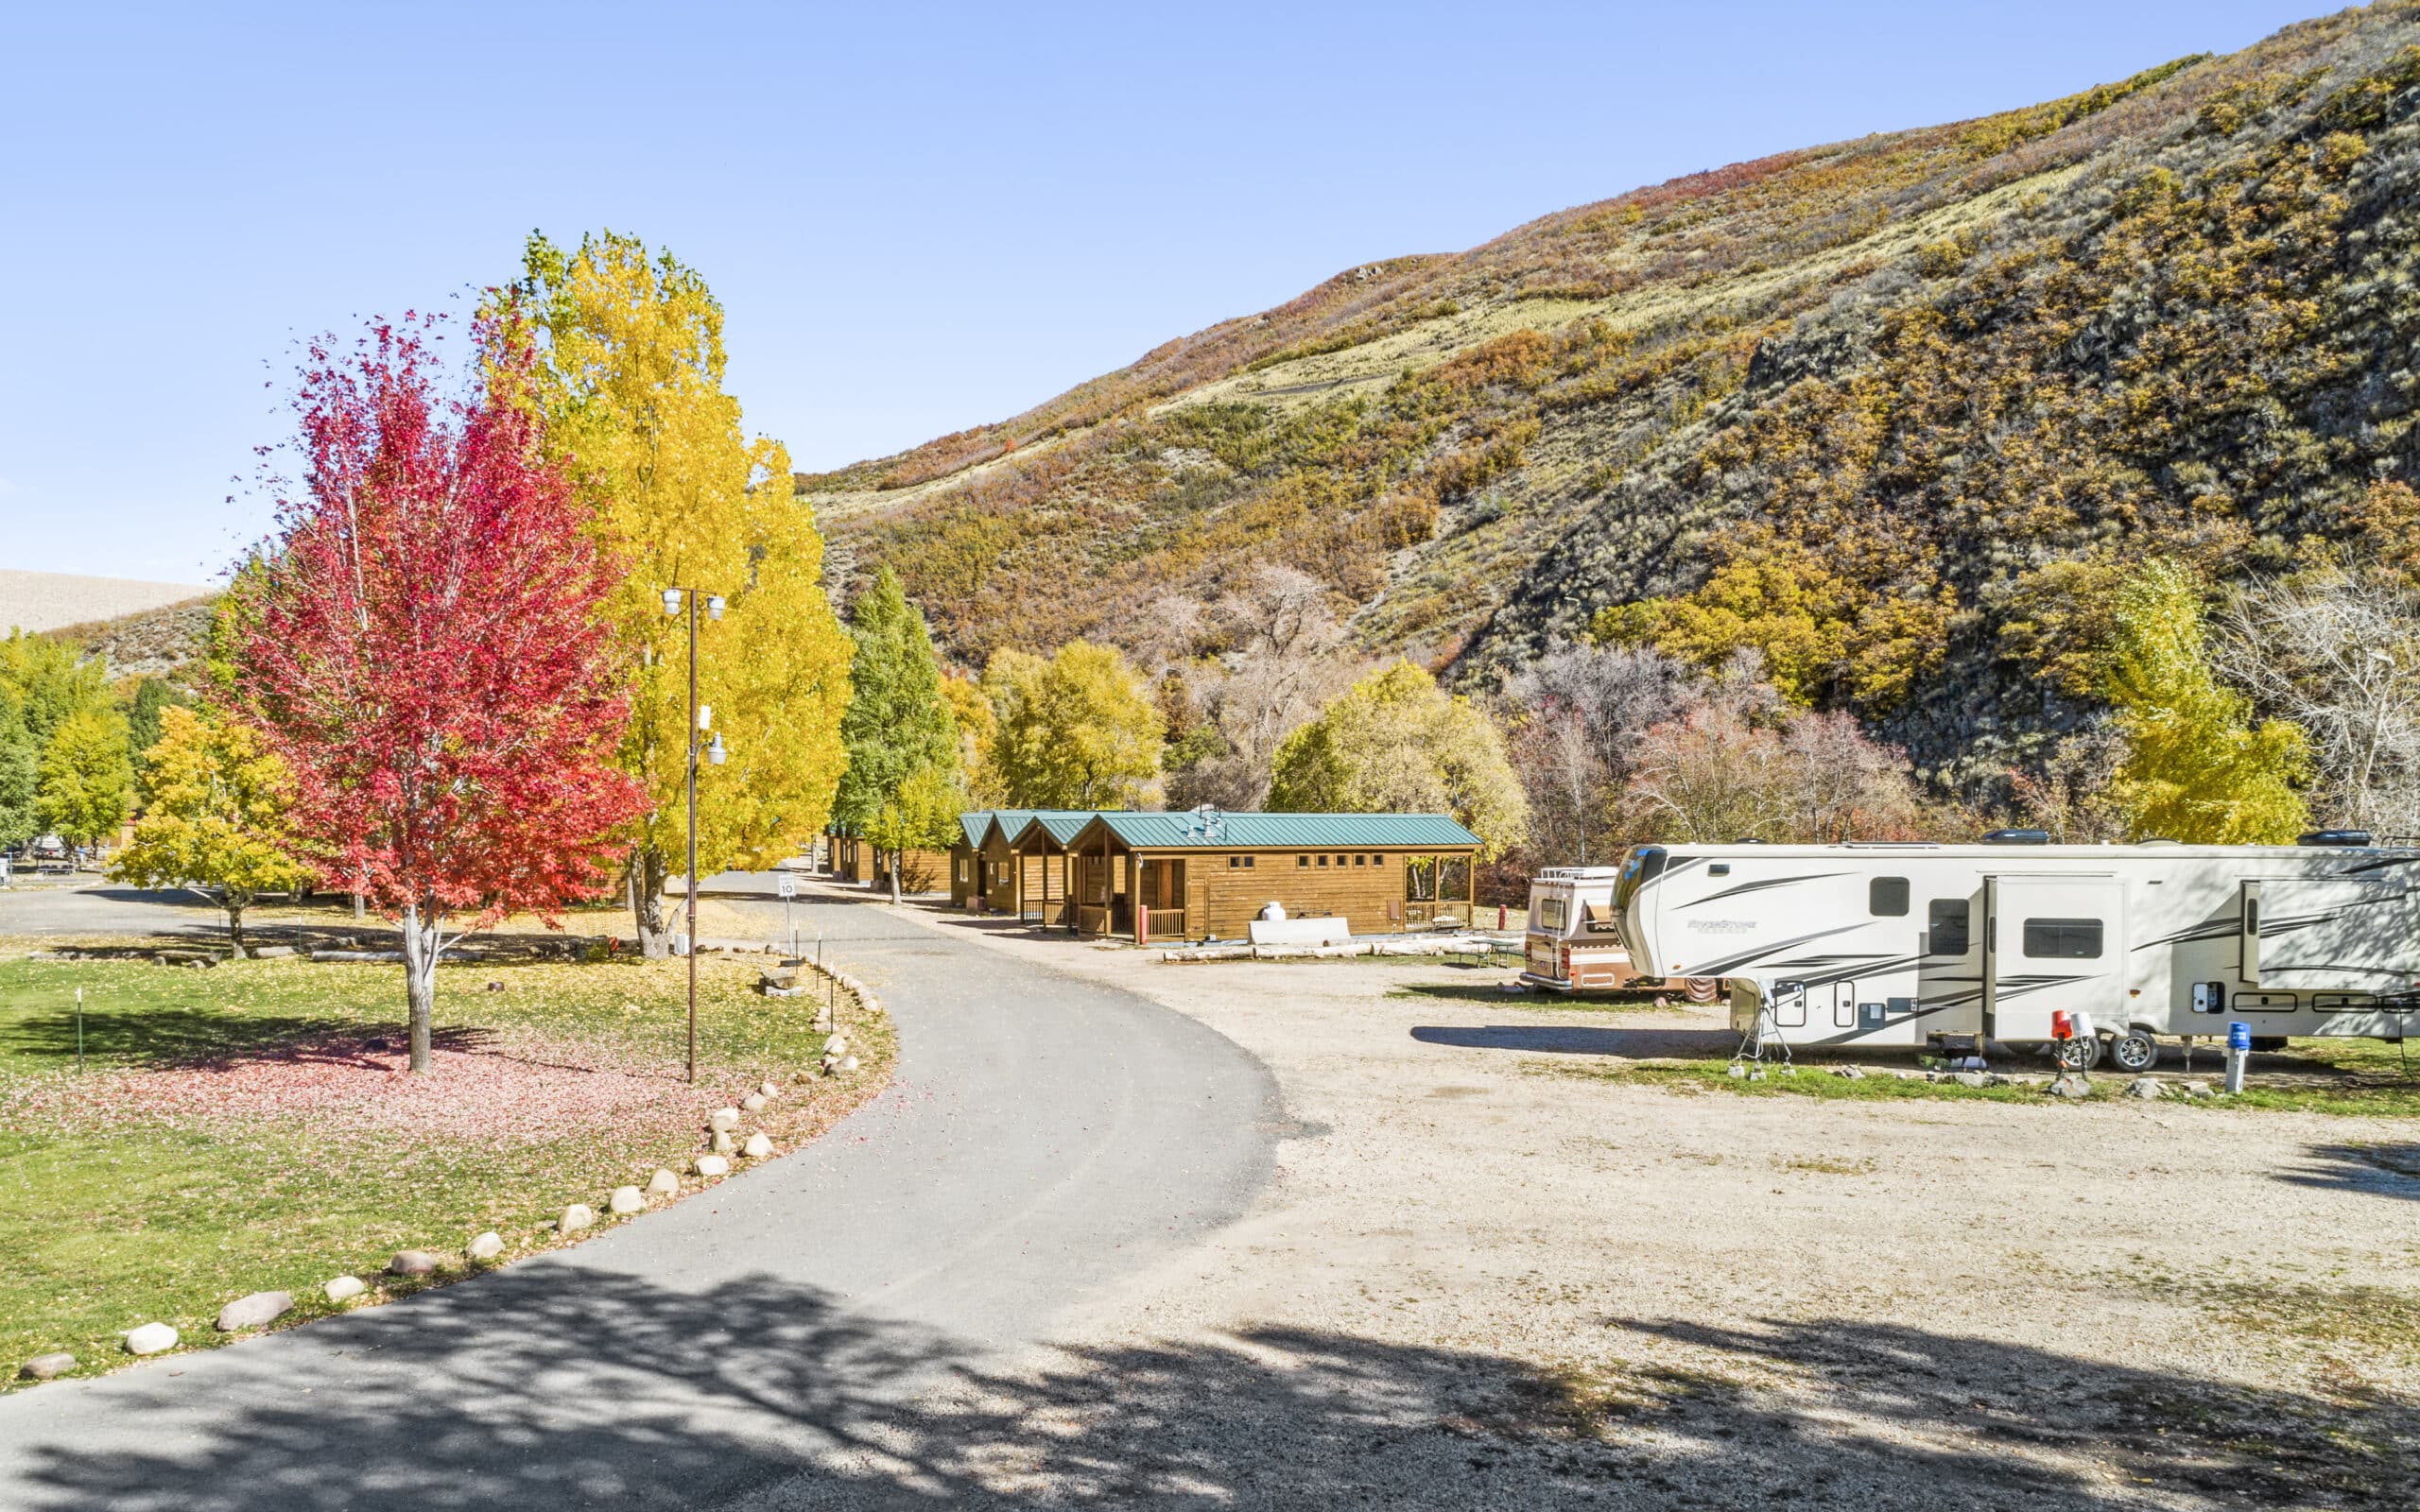 Monthly RV site leasing options